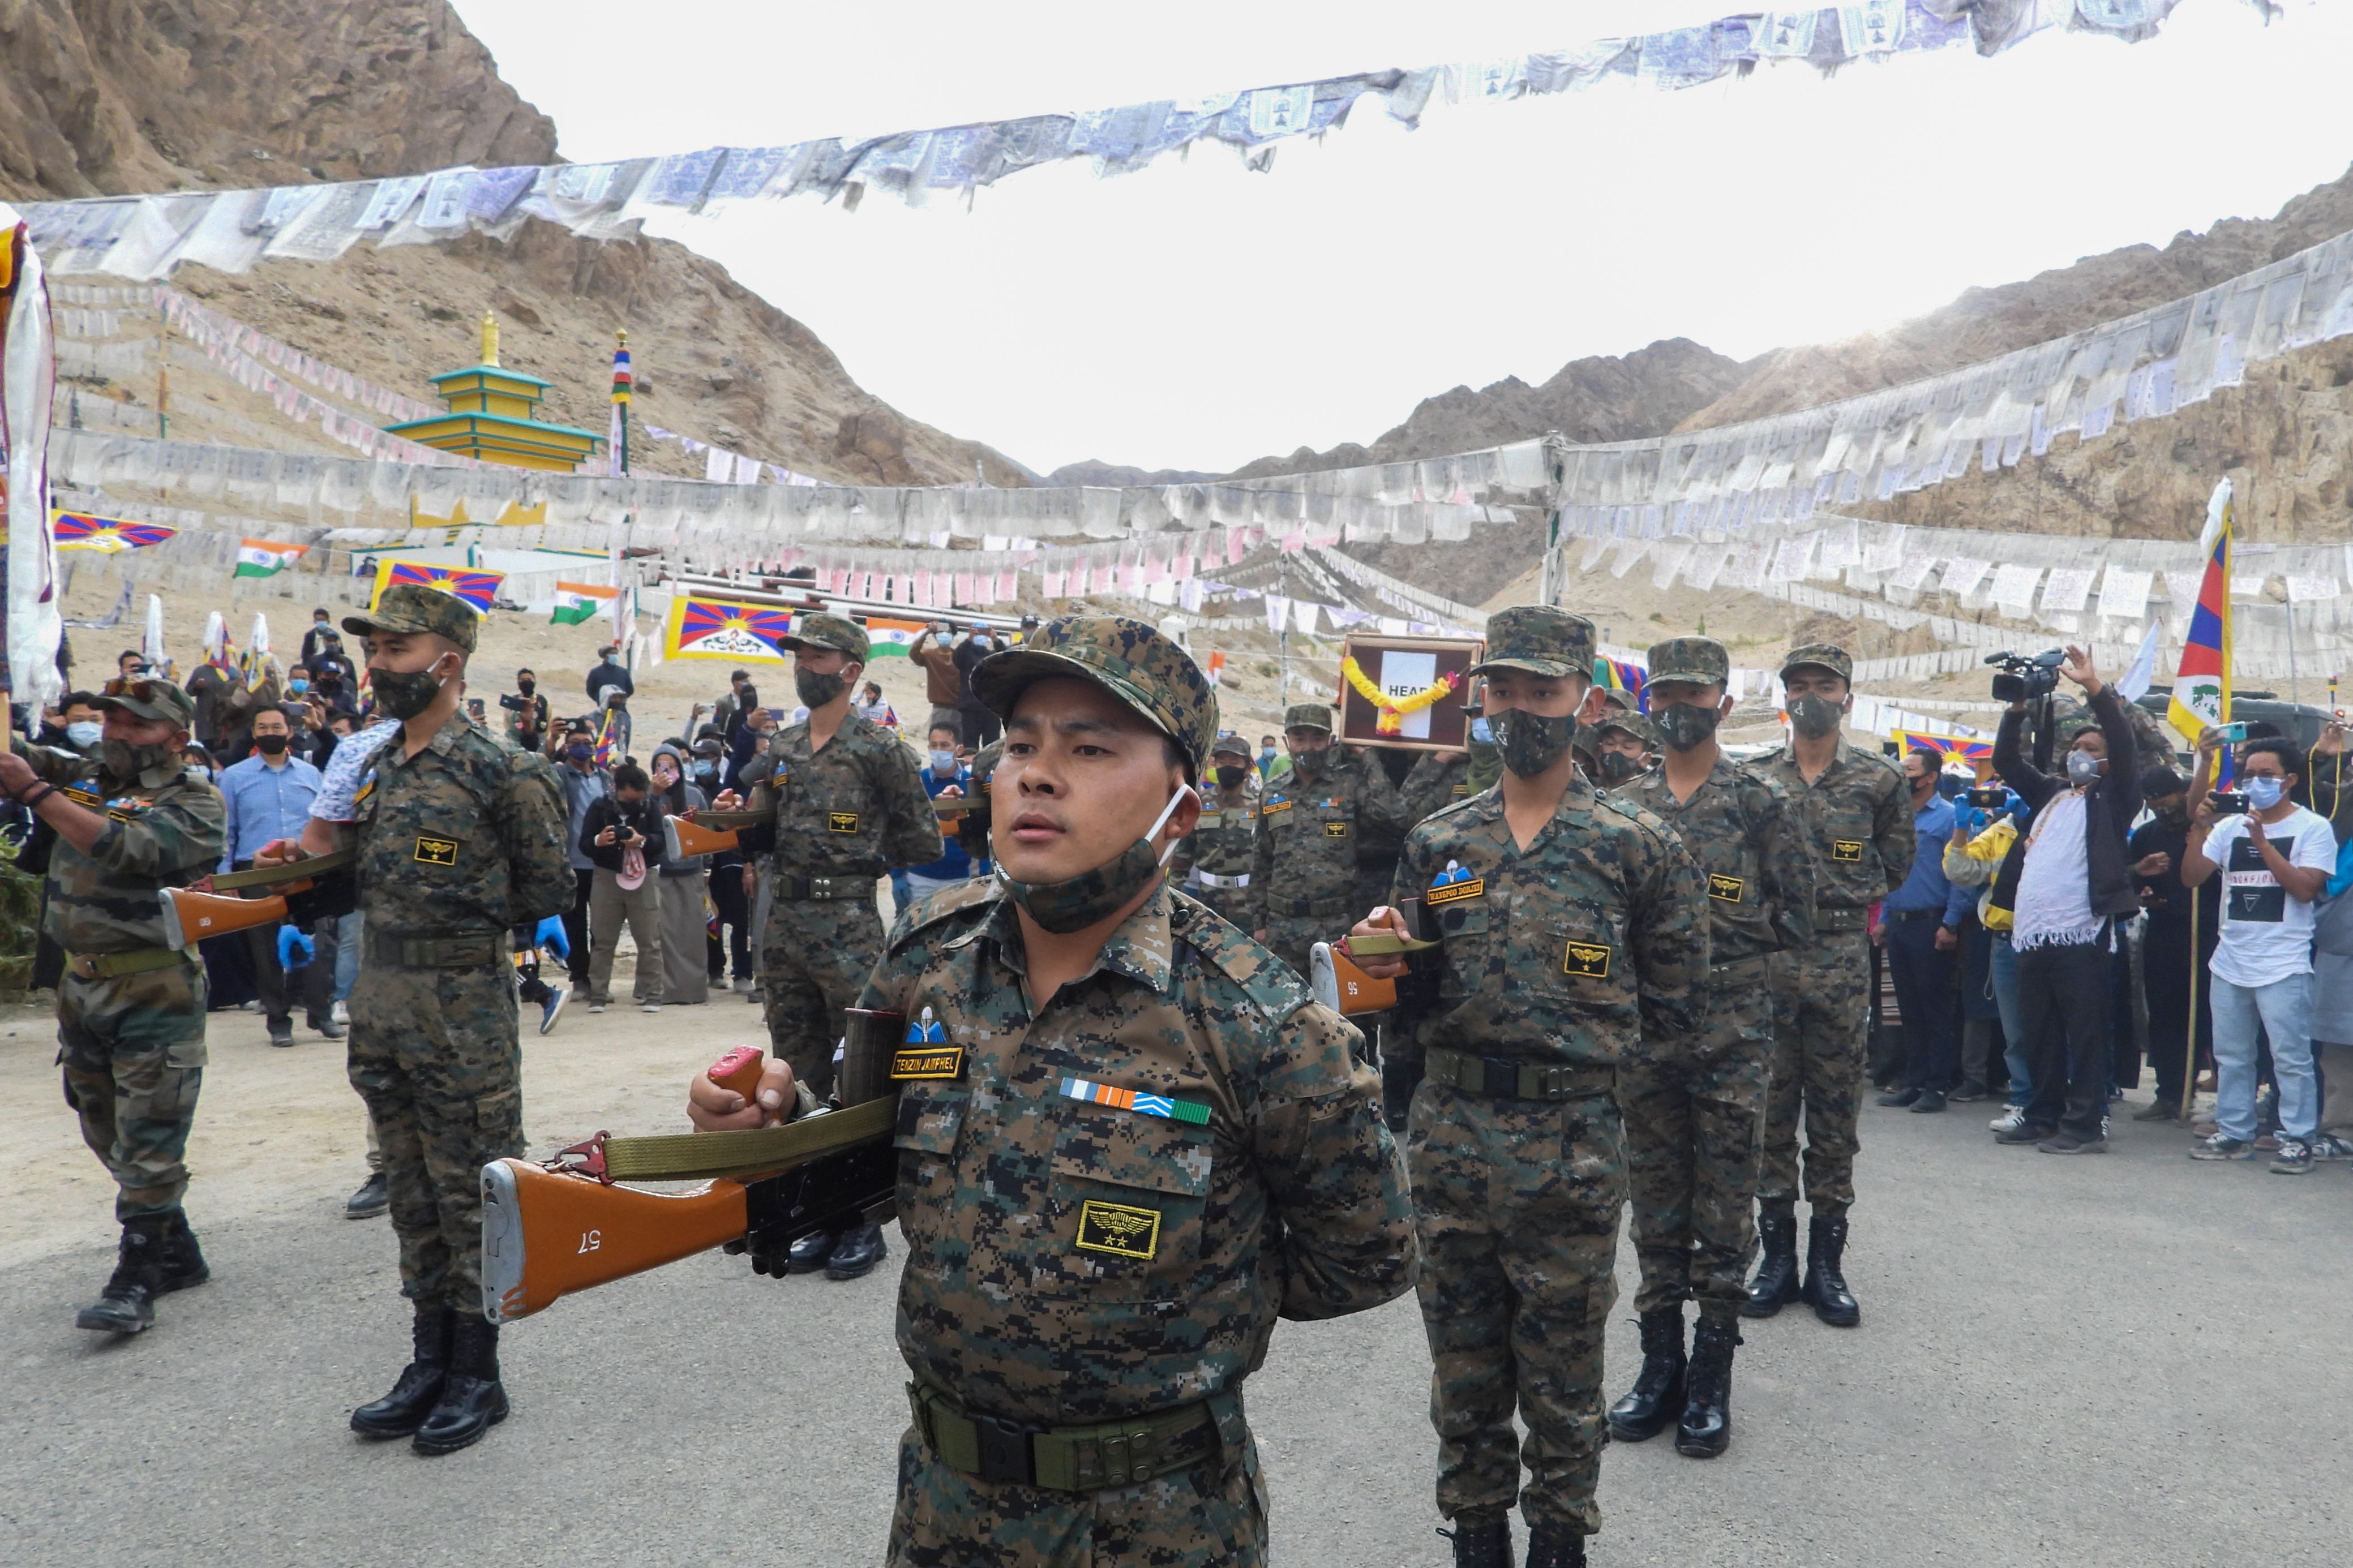 Indian troops pay respects to their fallen comrade, Tibetan-origin special forces soldier Nyima Tenzin in Leh on Sept. 7.